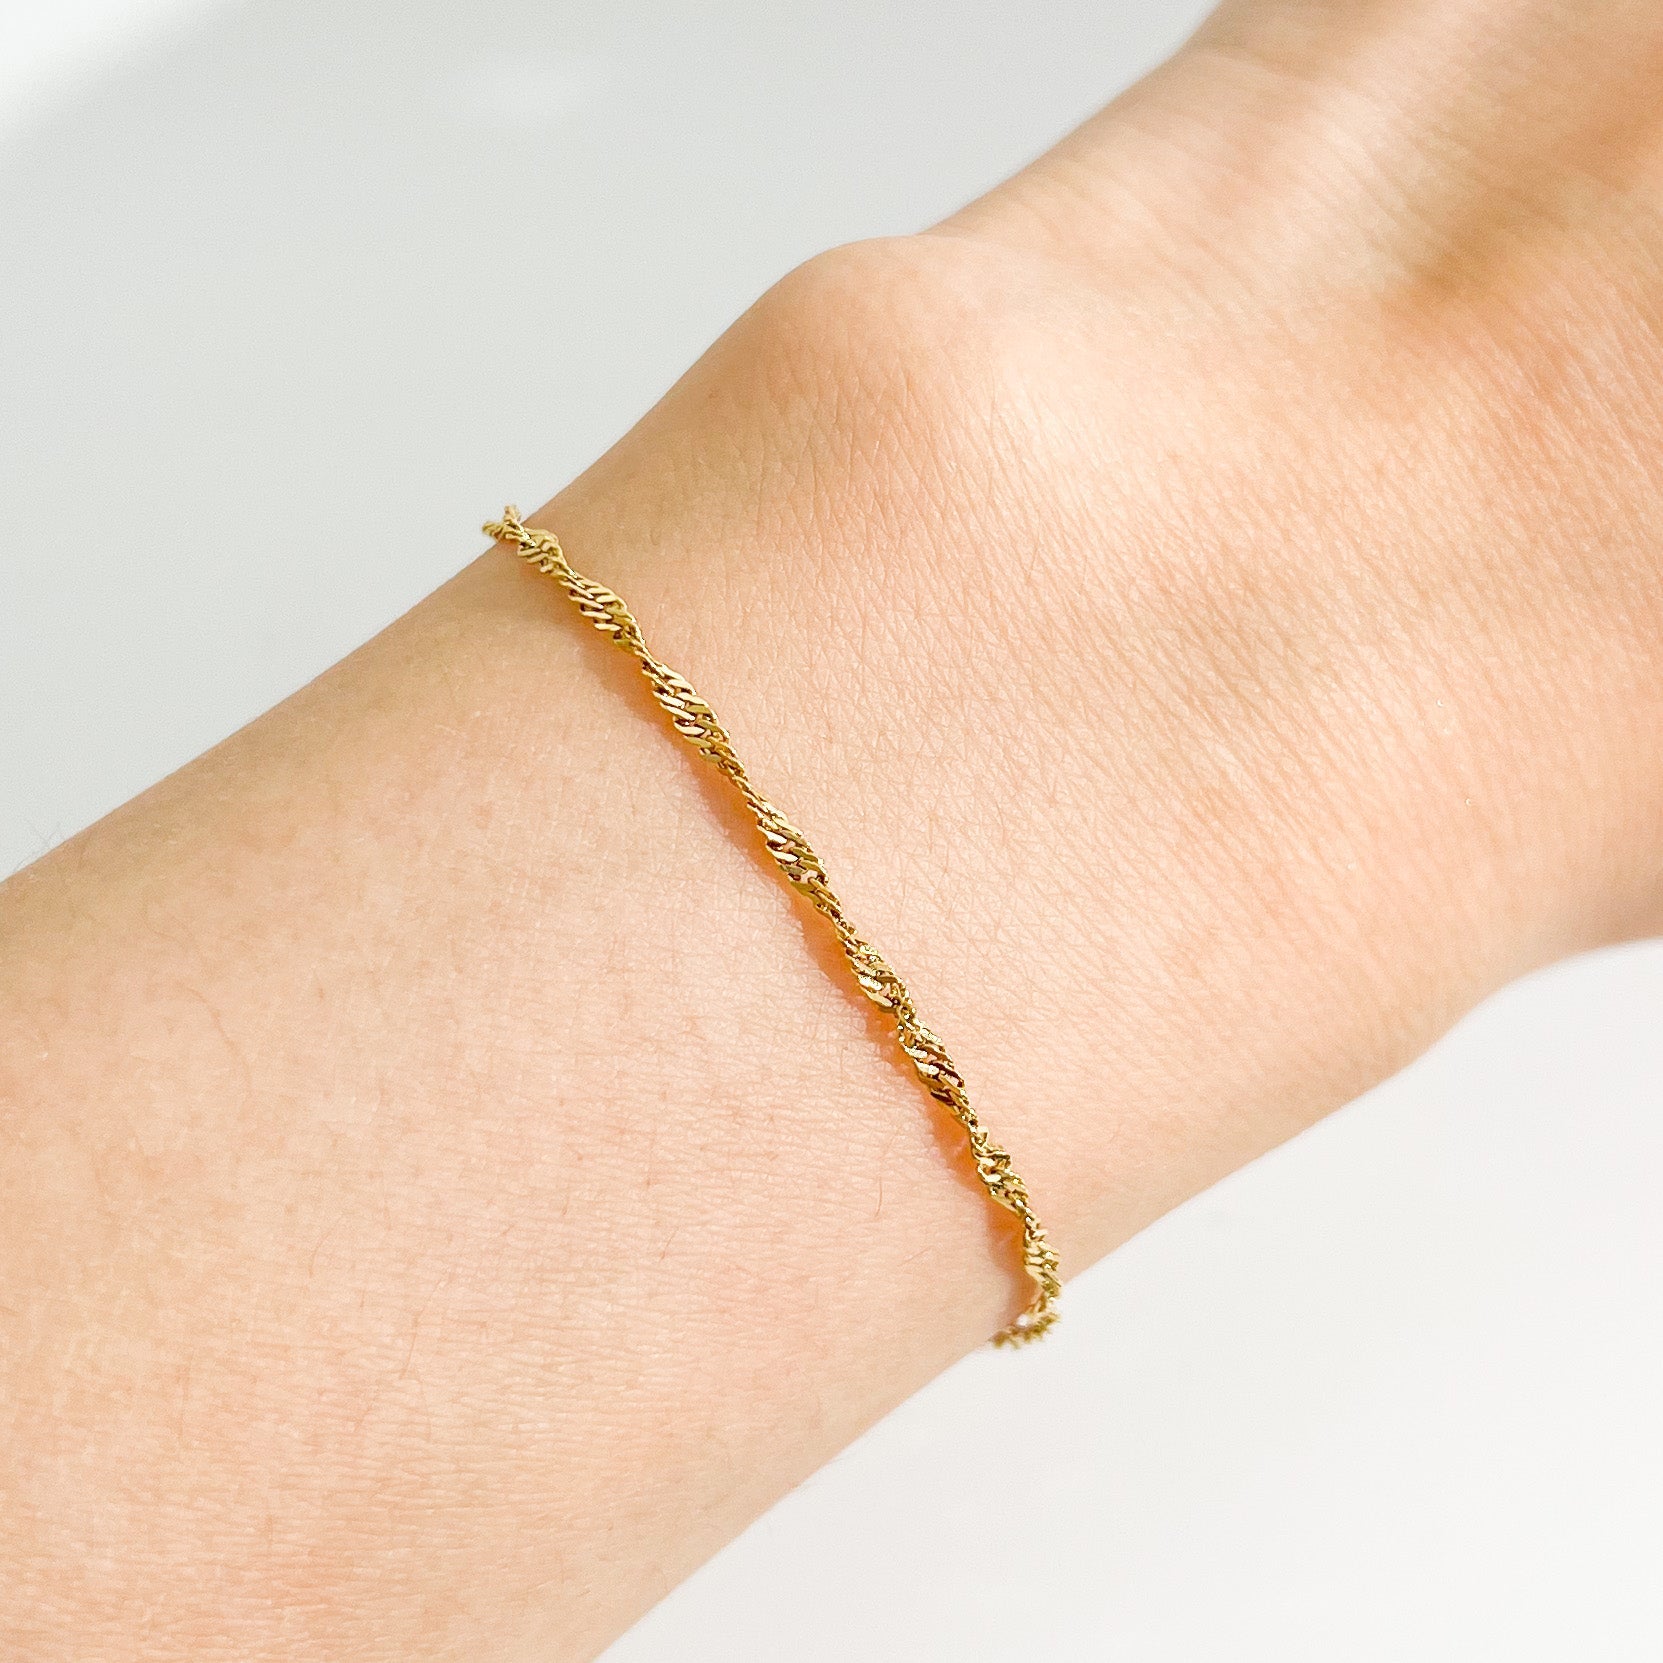 Felicia Bracelet in Gold - Flaire & Co.